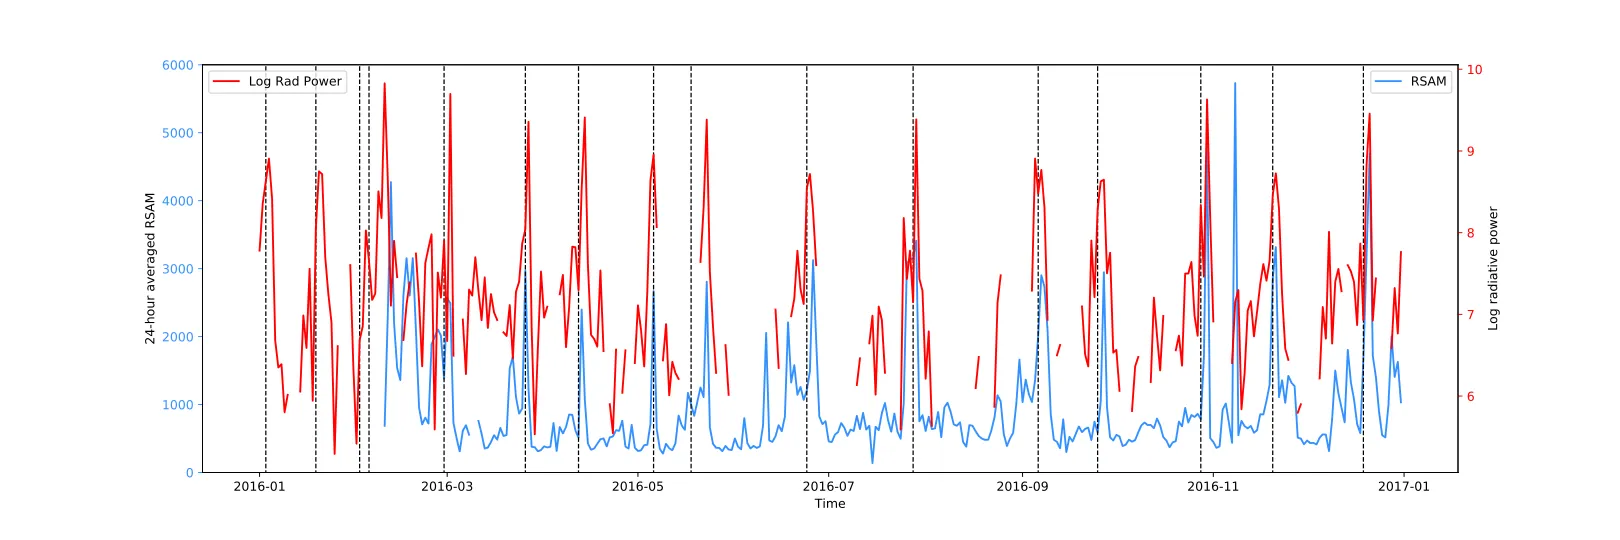 Timeseries data (red and blue) and event data (dotted vertical lines) plotted.